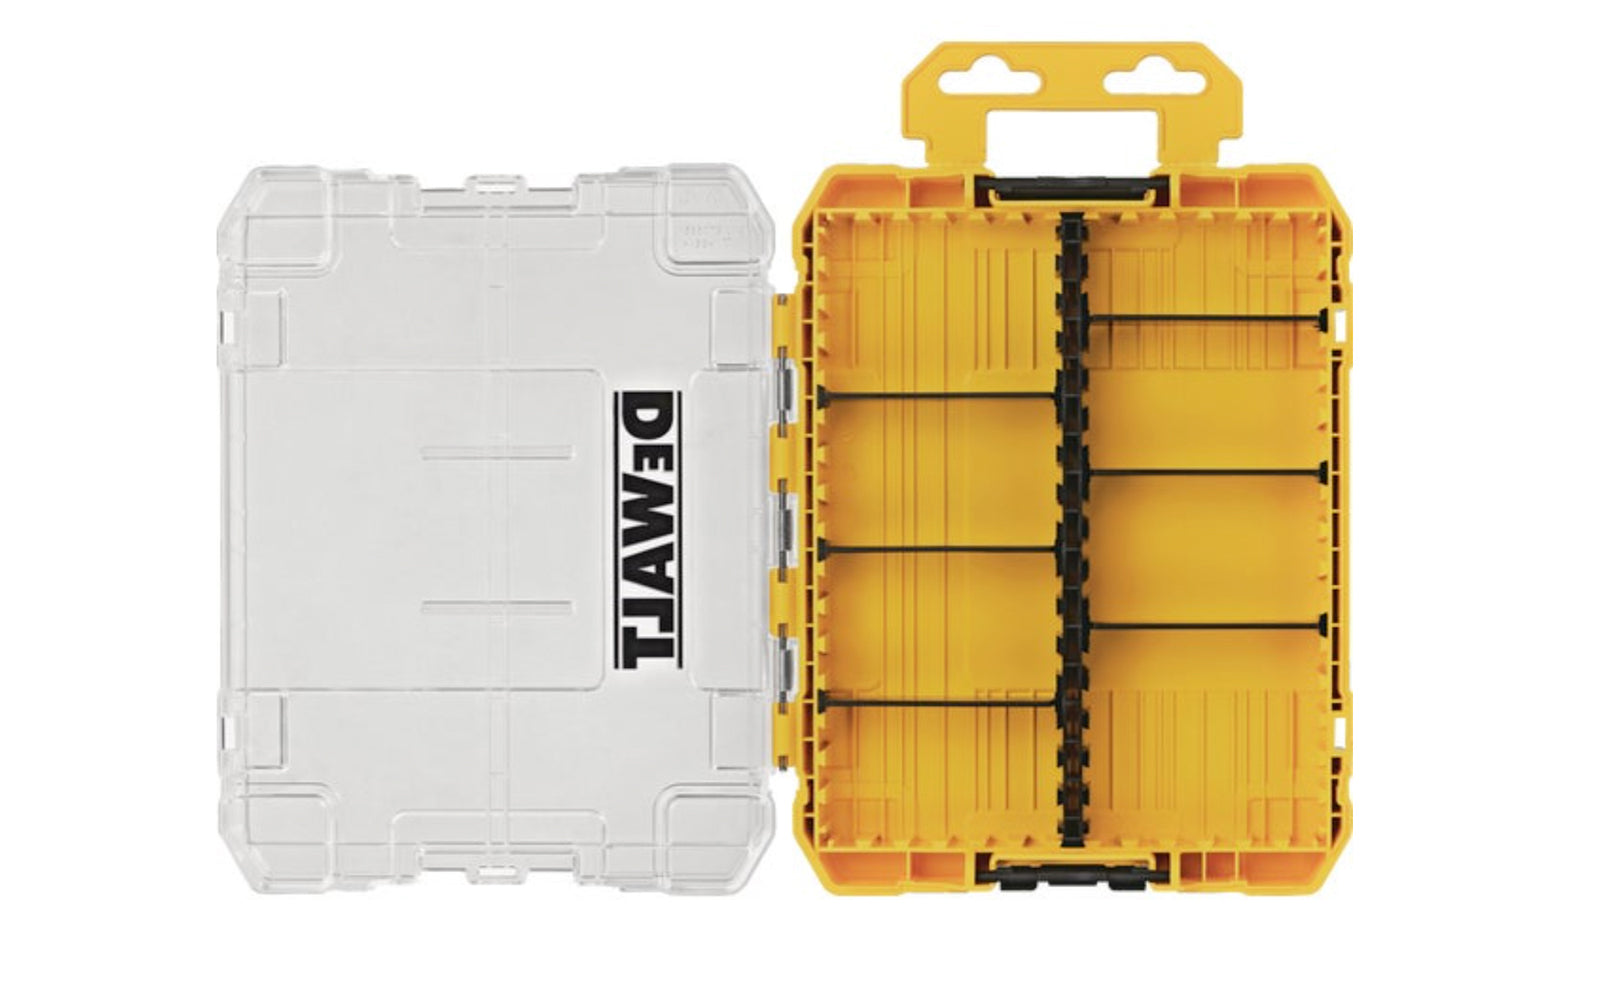 DeWalt Medium Size Tough Storage Case has sliding rubber latch. Locking interior lids keep components stored. Adjustable storage compartments to store various length and size accessories. 885911641623. DWAN2190